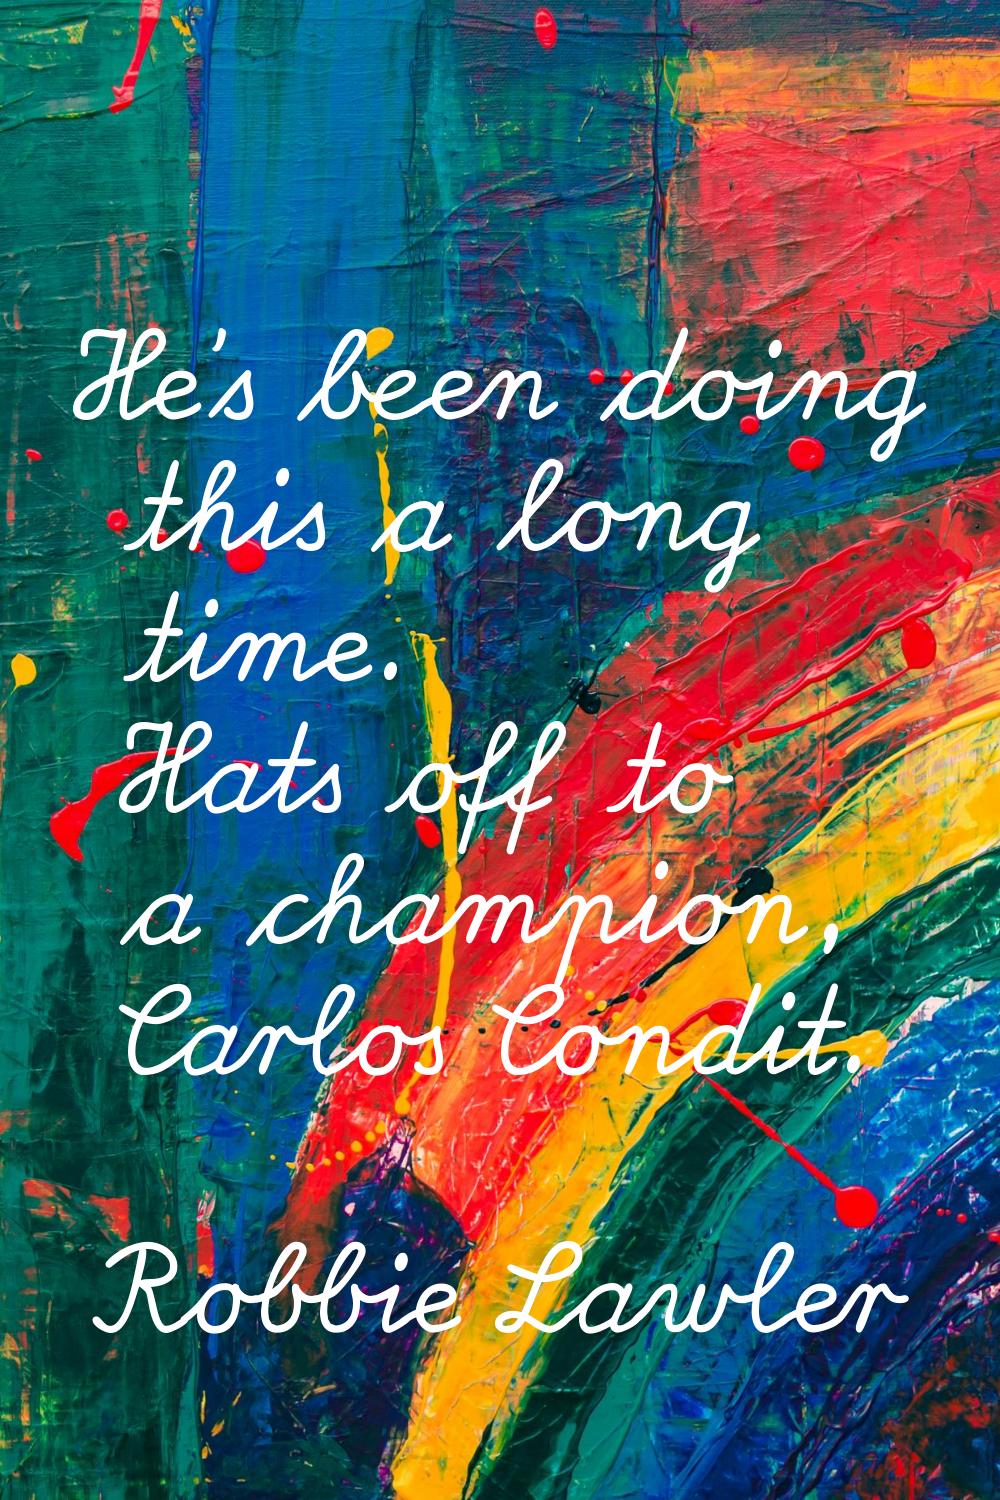 He's been doing this a long time. Hats off to a champion, Carlos Condit.